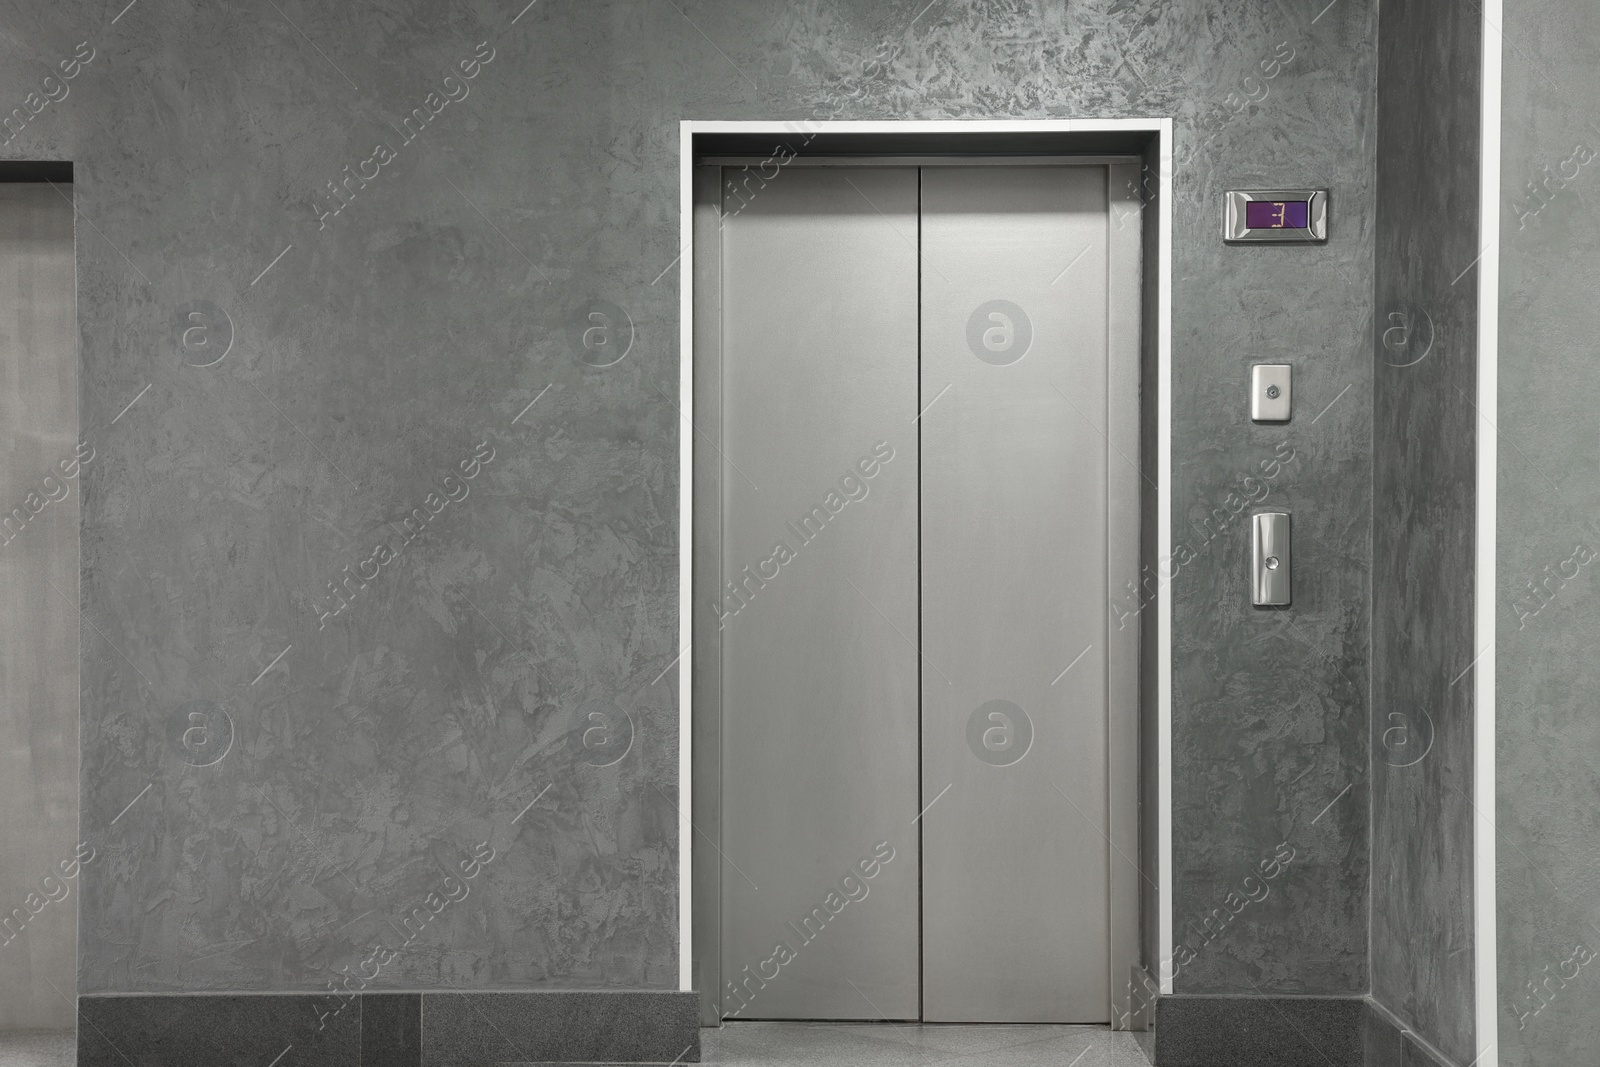 Photo of Closed stylish elevator door in clean hall